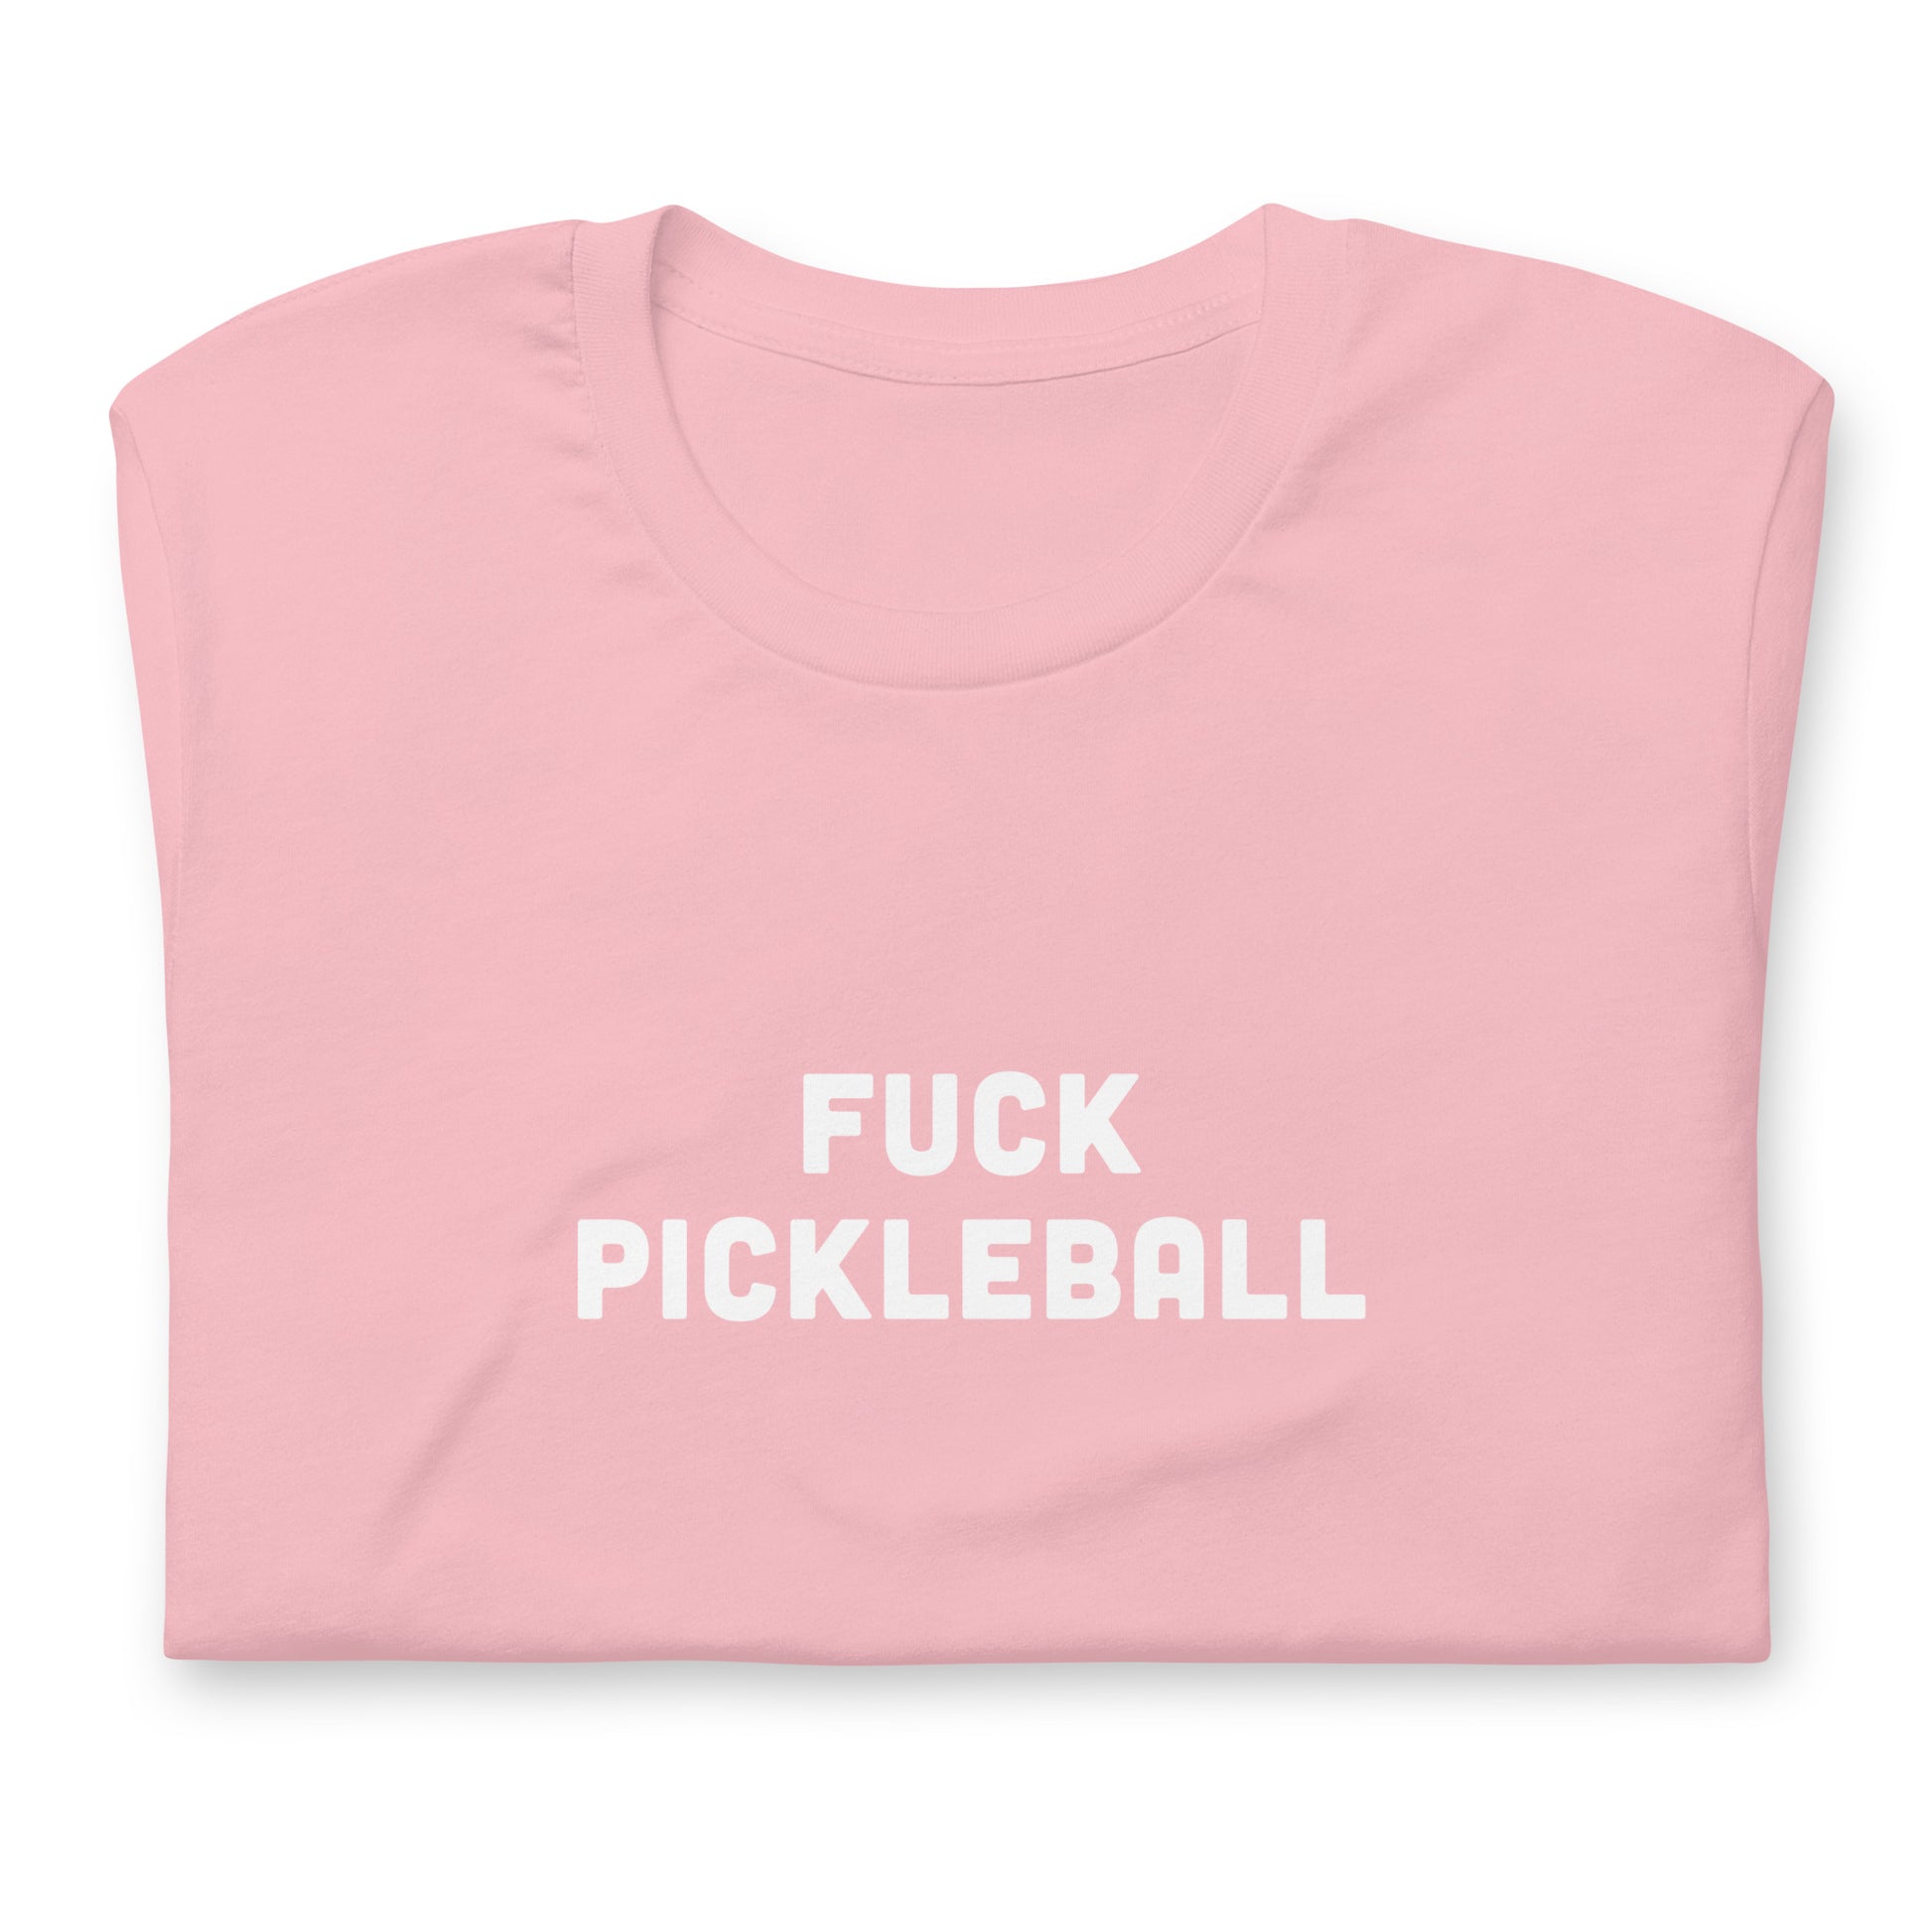 Fuck Pickleball T-Shirt Size 2XL Color Forest